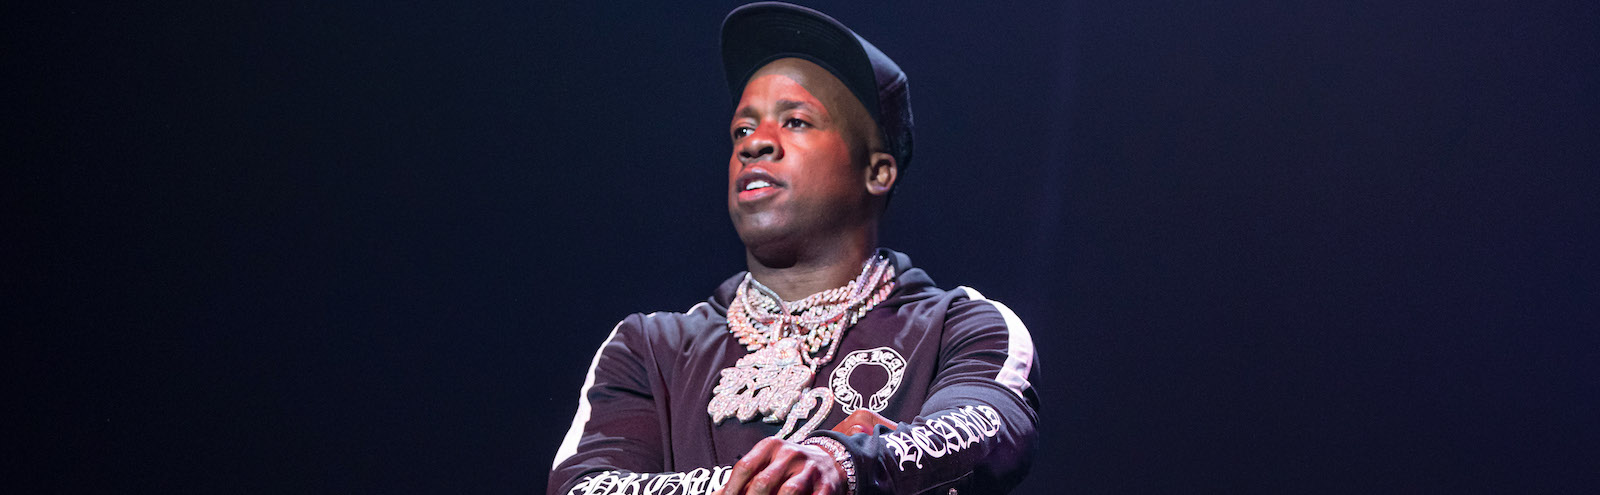 Yo Gotti Is Now A Co-Owner Of The MLS’ D.C. United Team